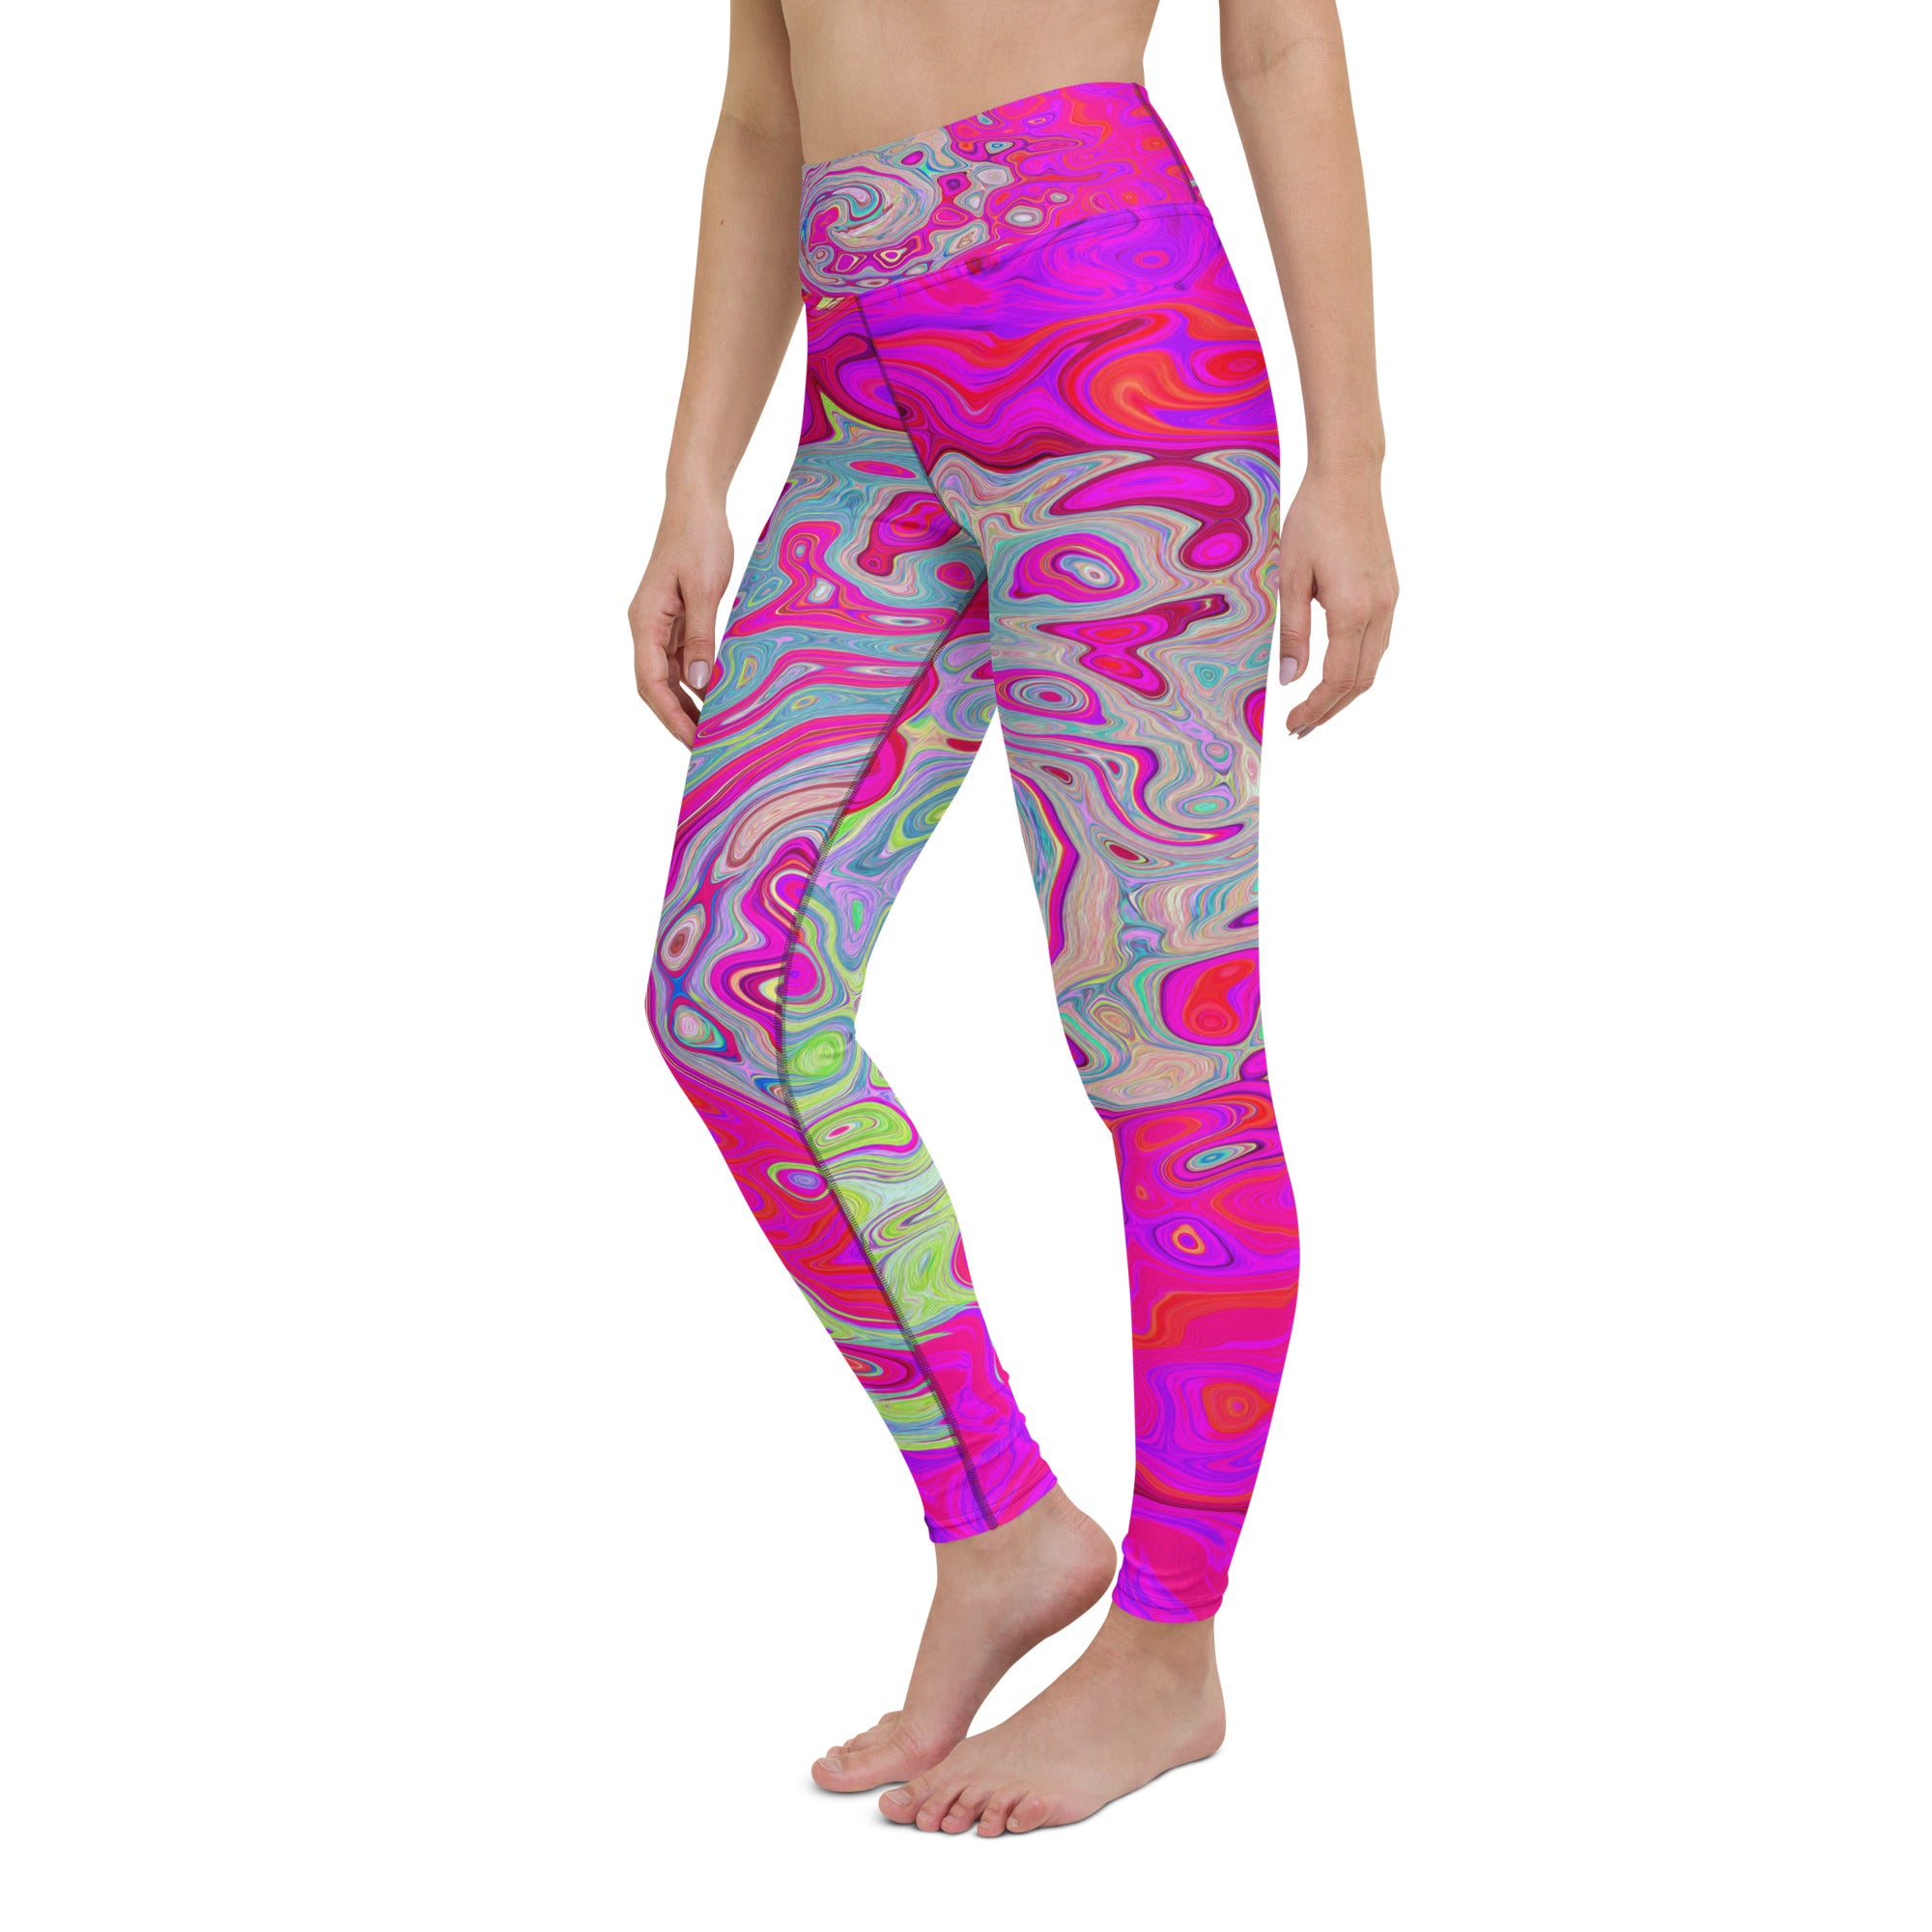 Yoga Leggings, Groovy Abstract Teal Blue and Red Swirl